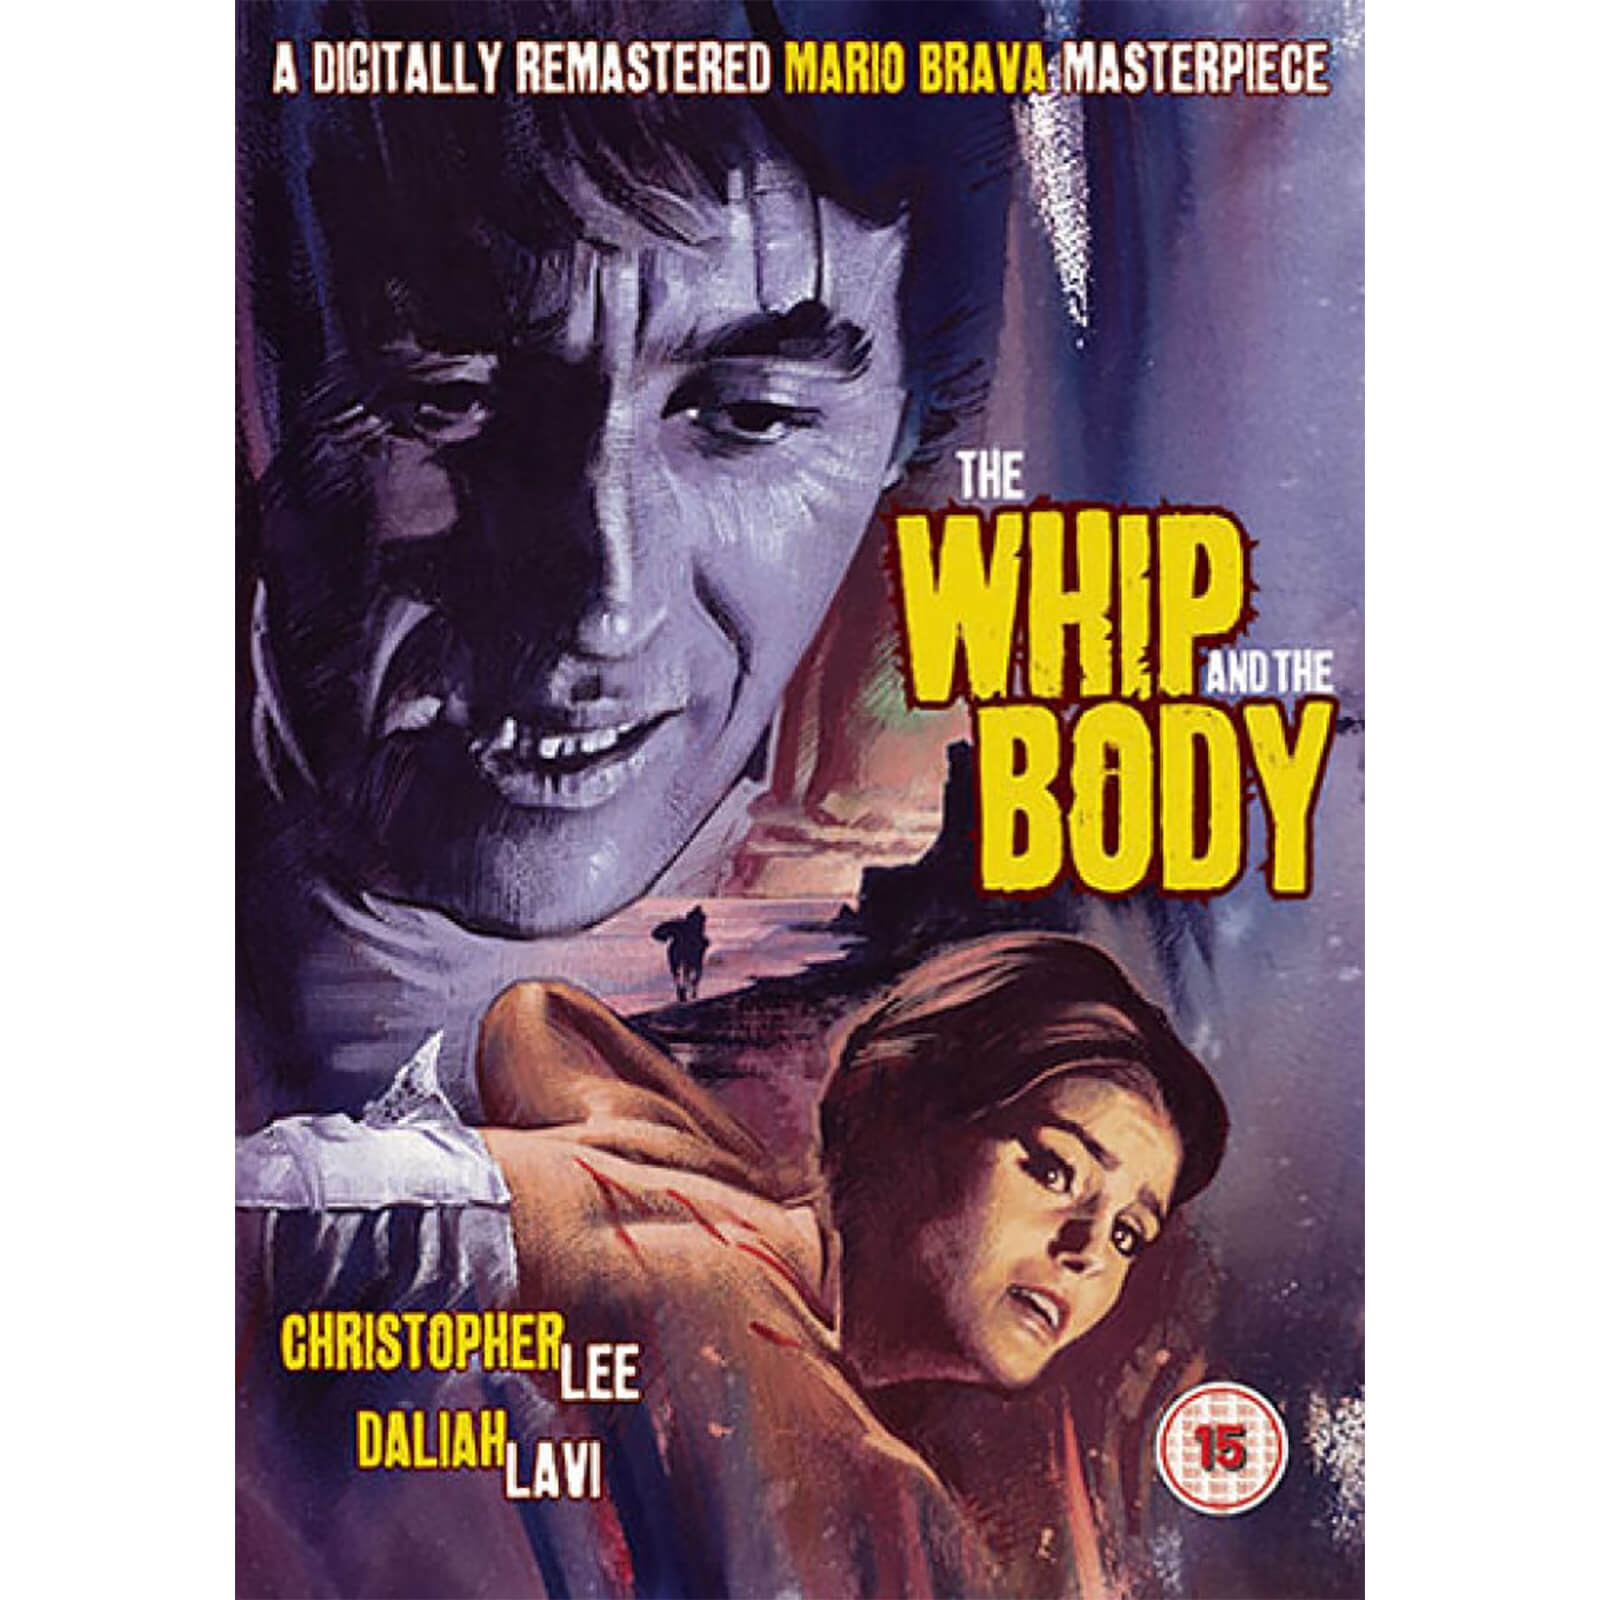 The Whip and The Body (Digitally Remastered) von Odeon Entertainment